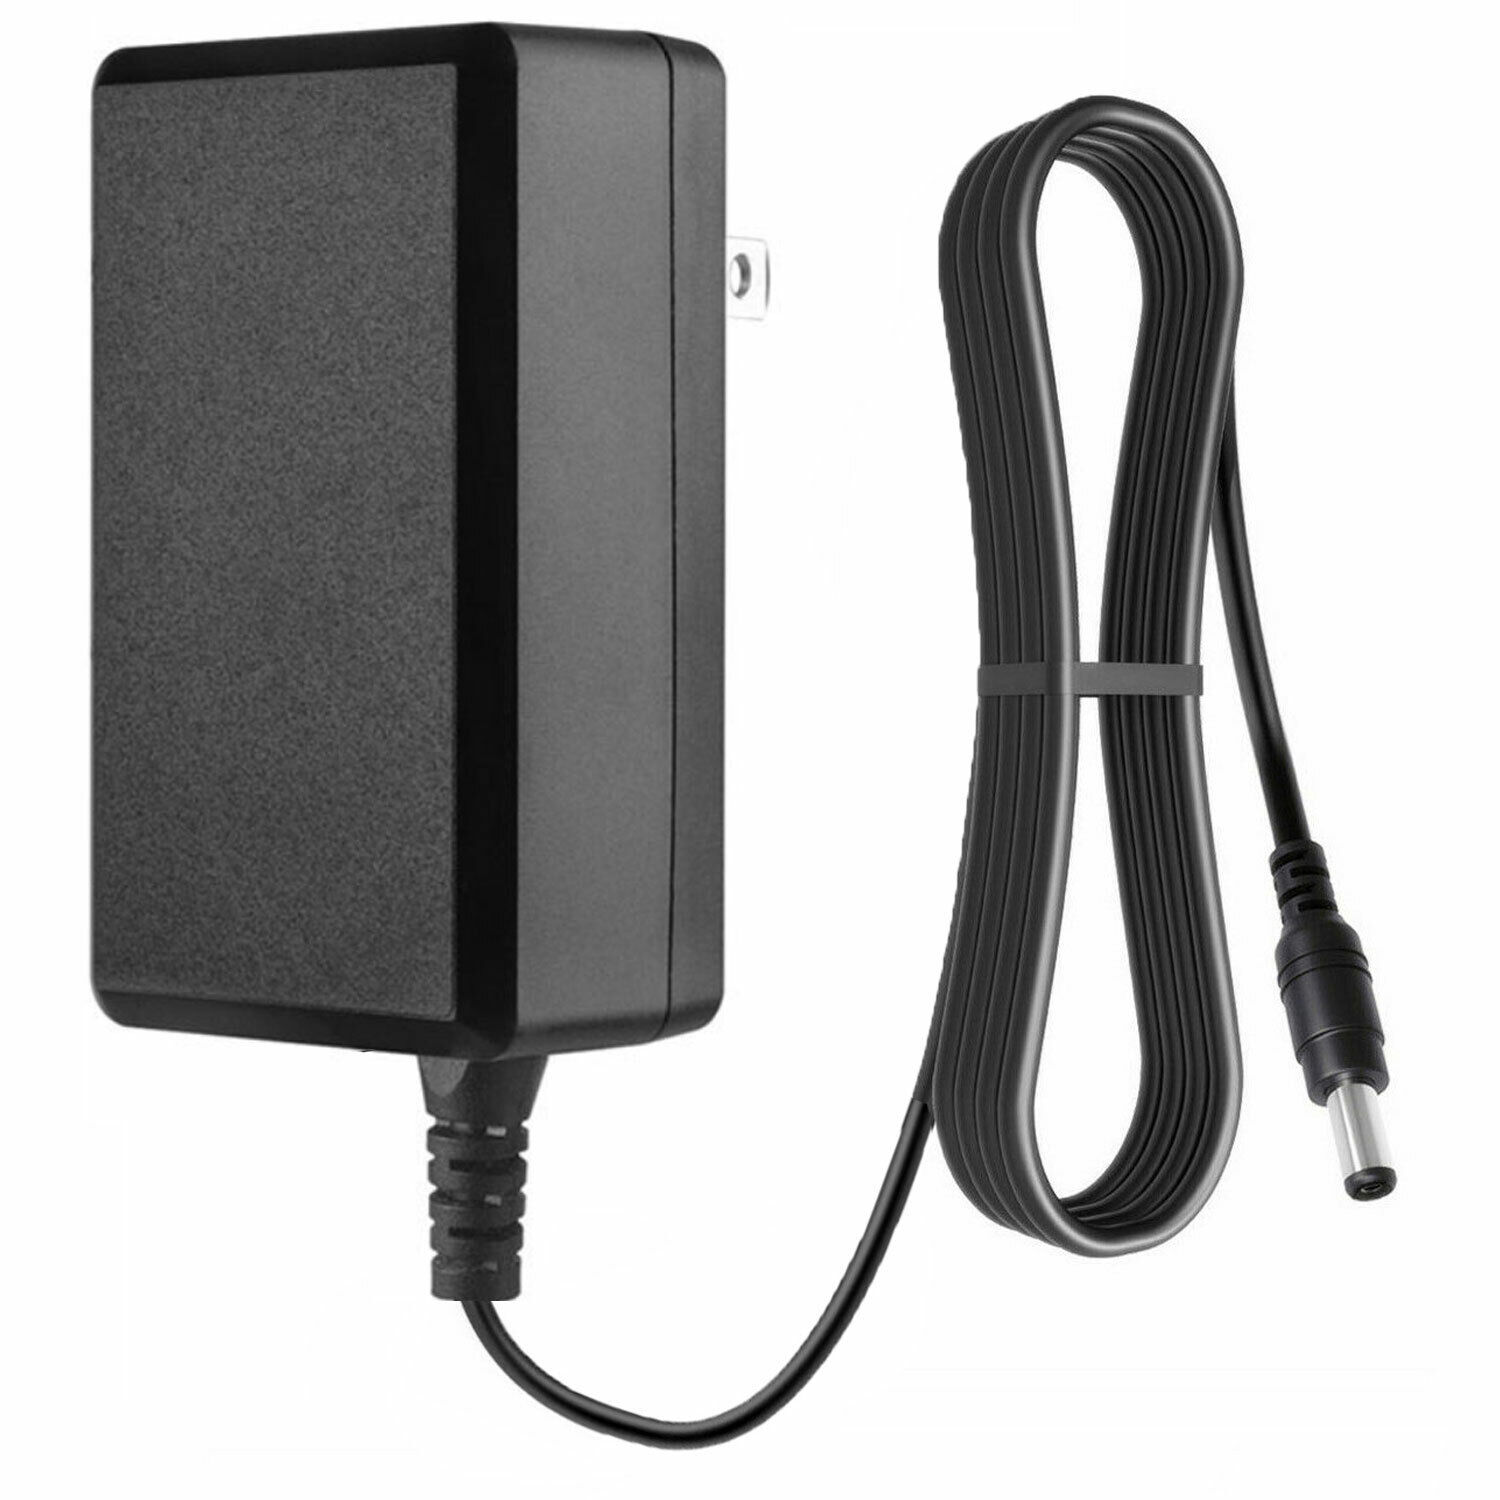 *Brand NEW*Samsung DSP-6014C AC/DC Adapter 14V 4.29A Original Charger Power Supply